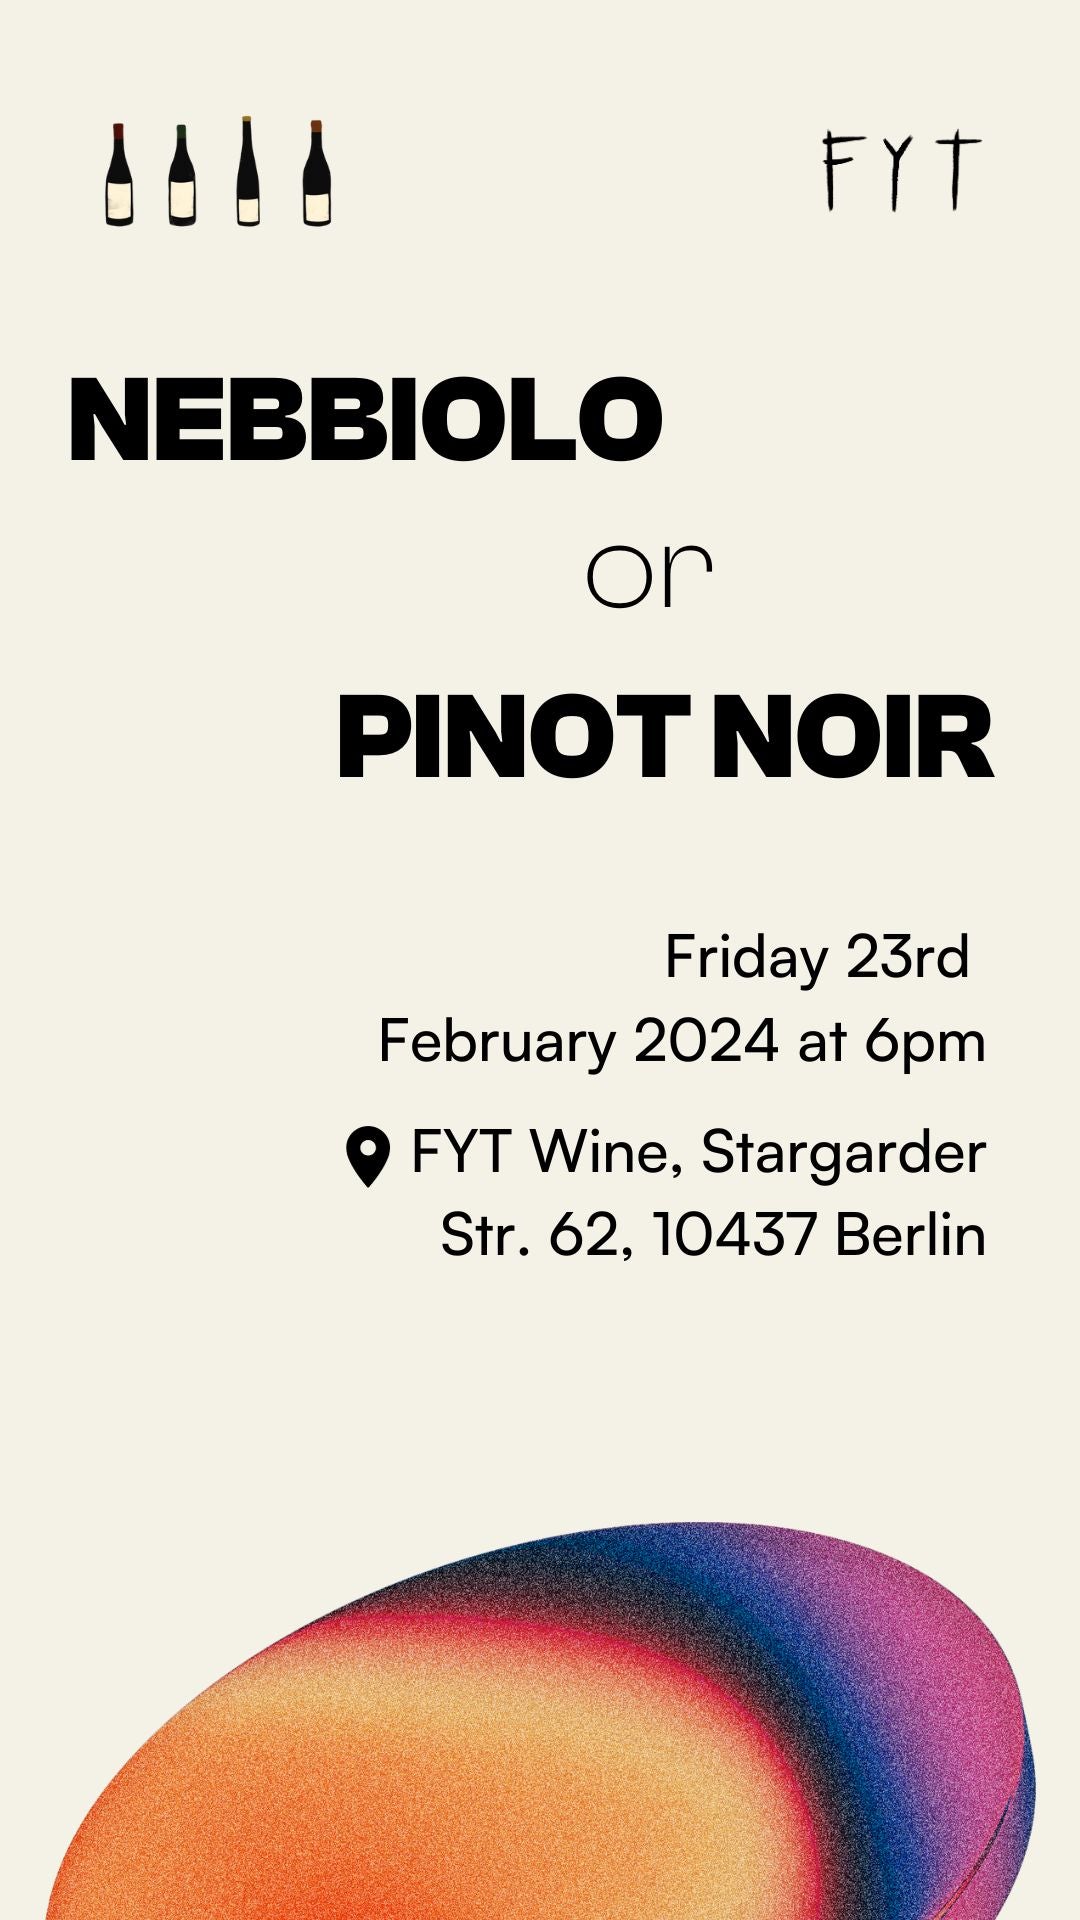 Nebbiolo or Pinot Noir - Friday 23rd February